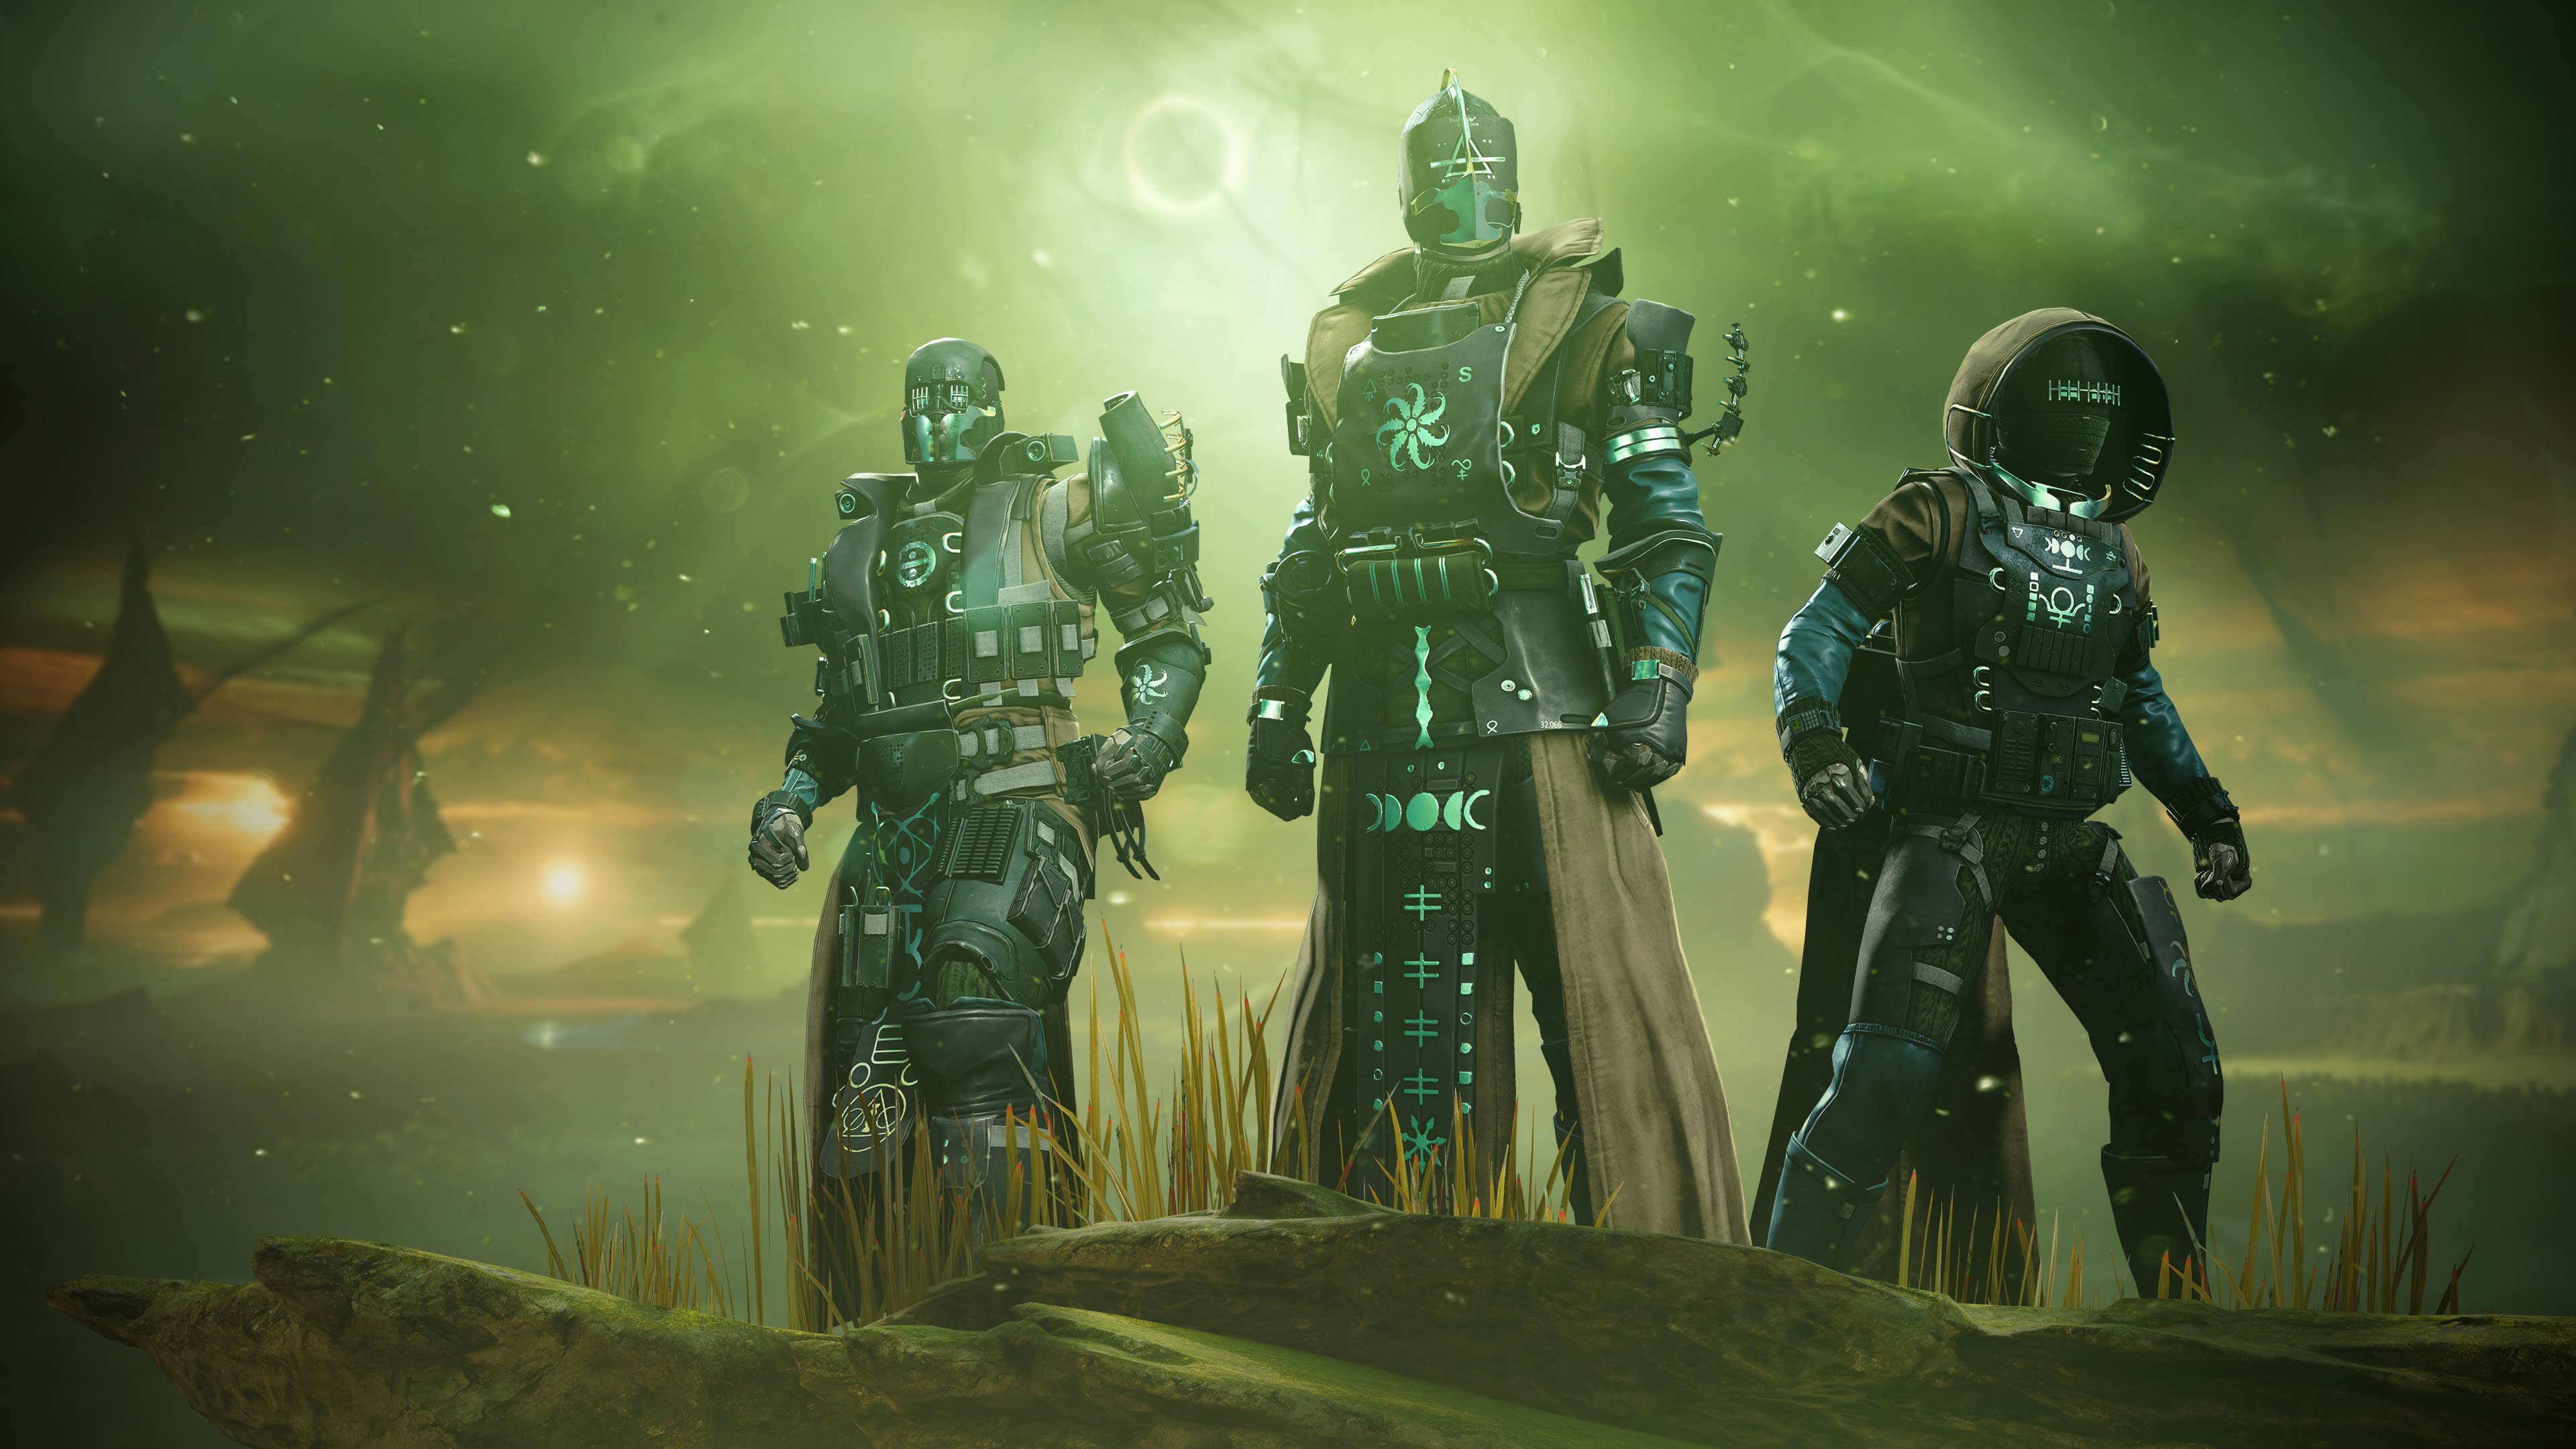  Destiny 2 cheat maker claims it hasn't harmed the game, says Bungie should work with it  